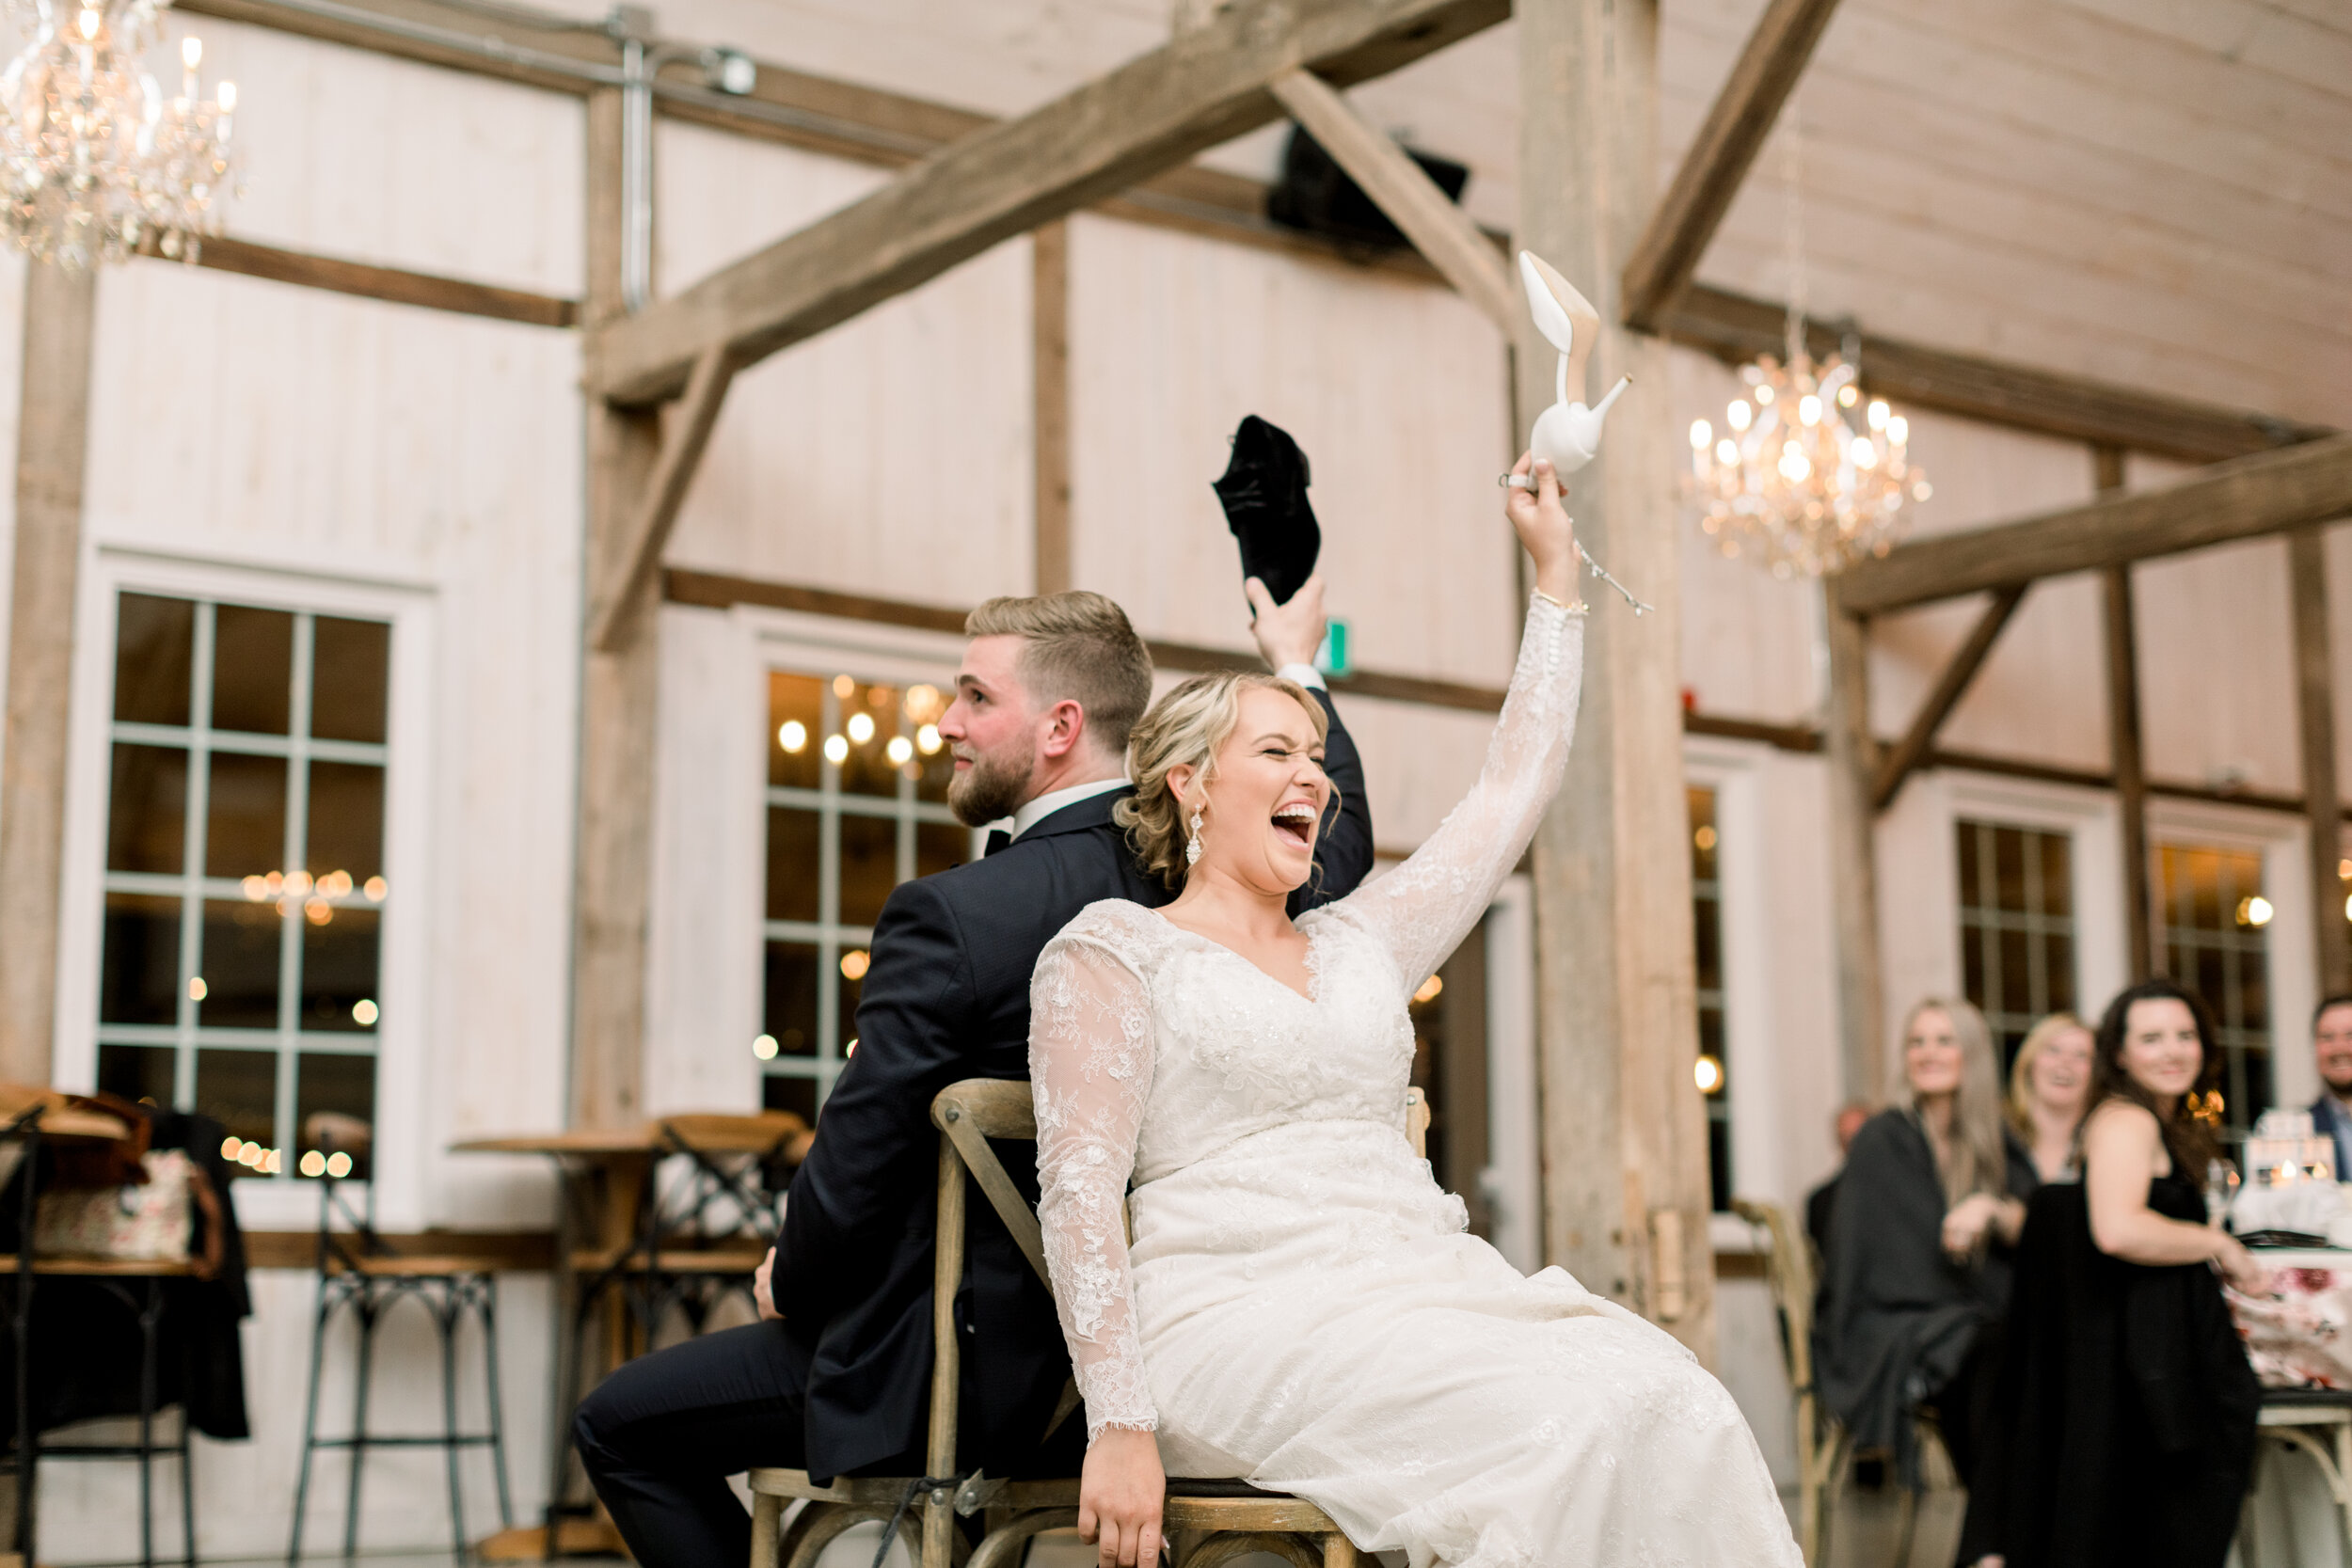  Ottowa bride and groom at their wedding reception at the rustic stonefield wedding venue in ottowa lifting their shoes and laughing as the play the ‘shoe game’ in front of their guests. Wedding games bridal heels unique wedding dress wedding recepti